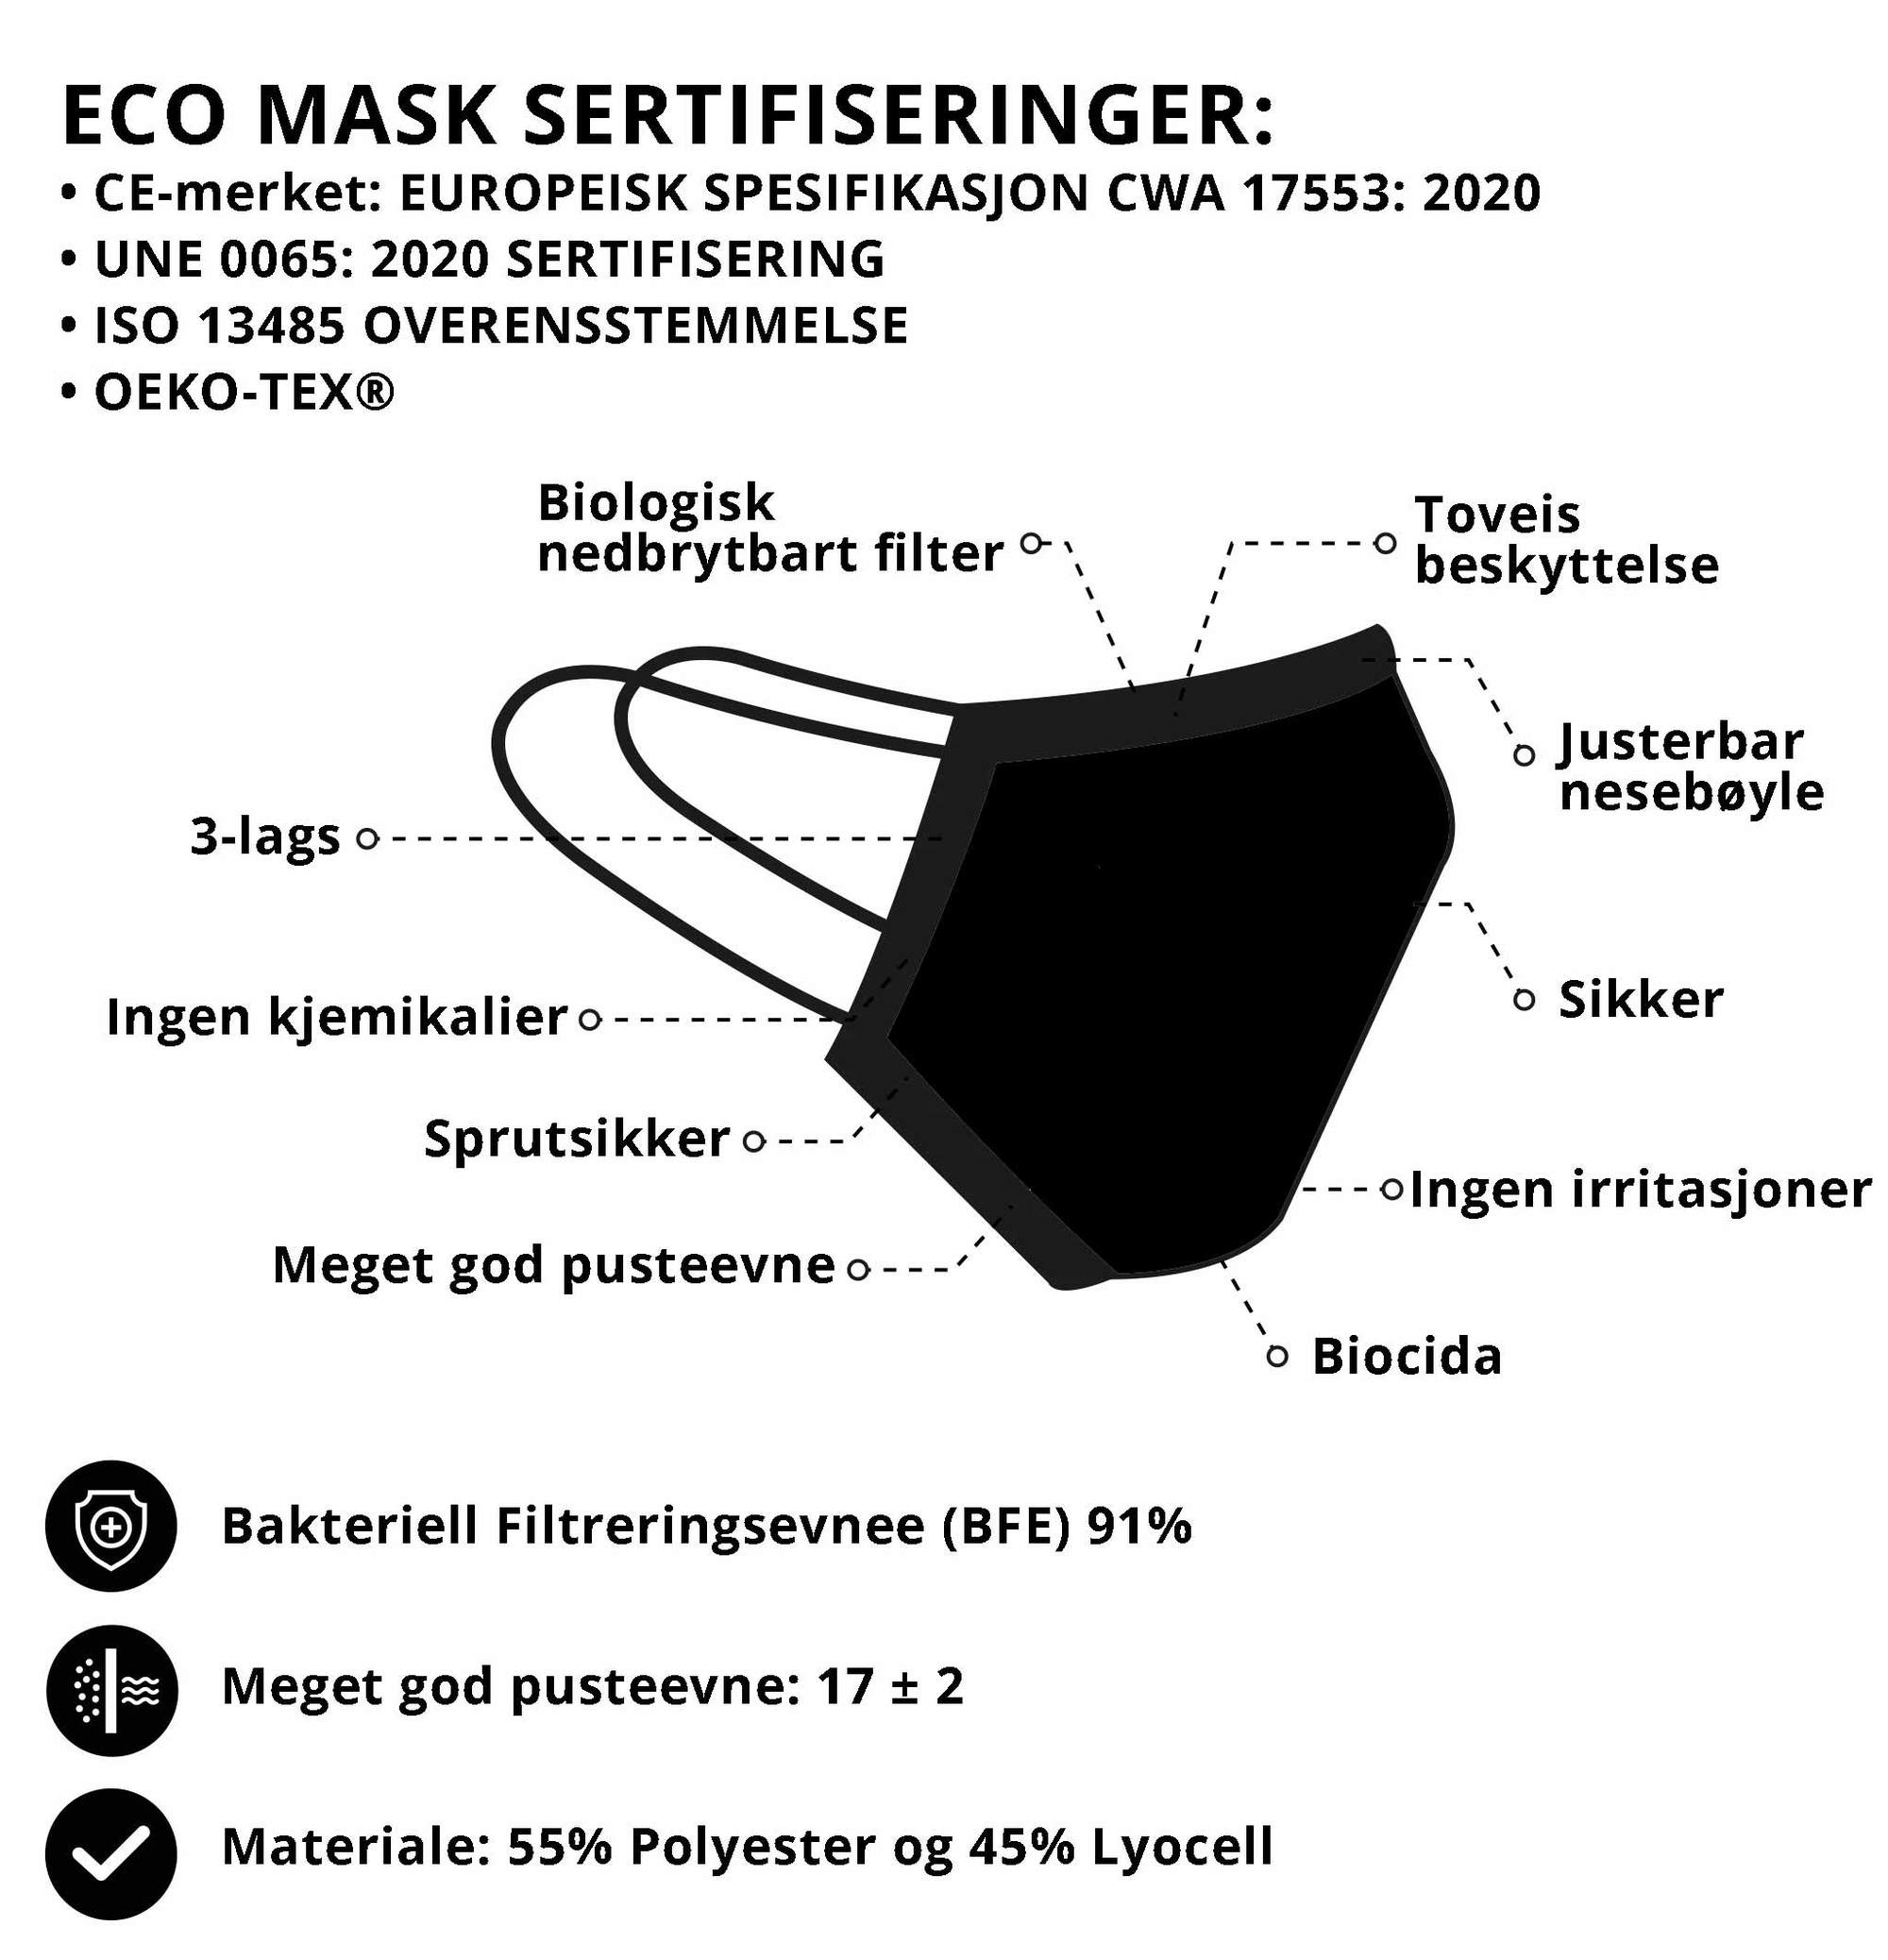 ECO 3-layer washable cloth mask: The Future Is Female, produced according to European Specification CWA 17553: 2020 